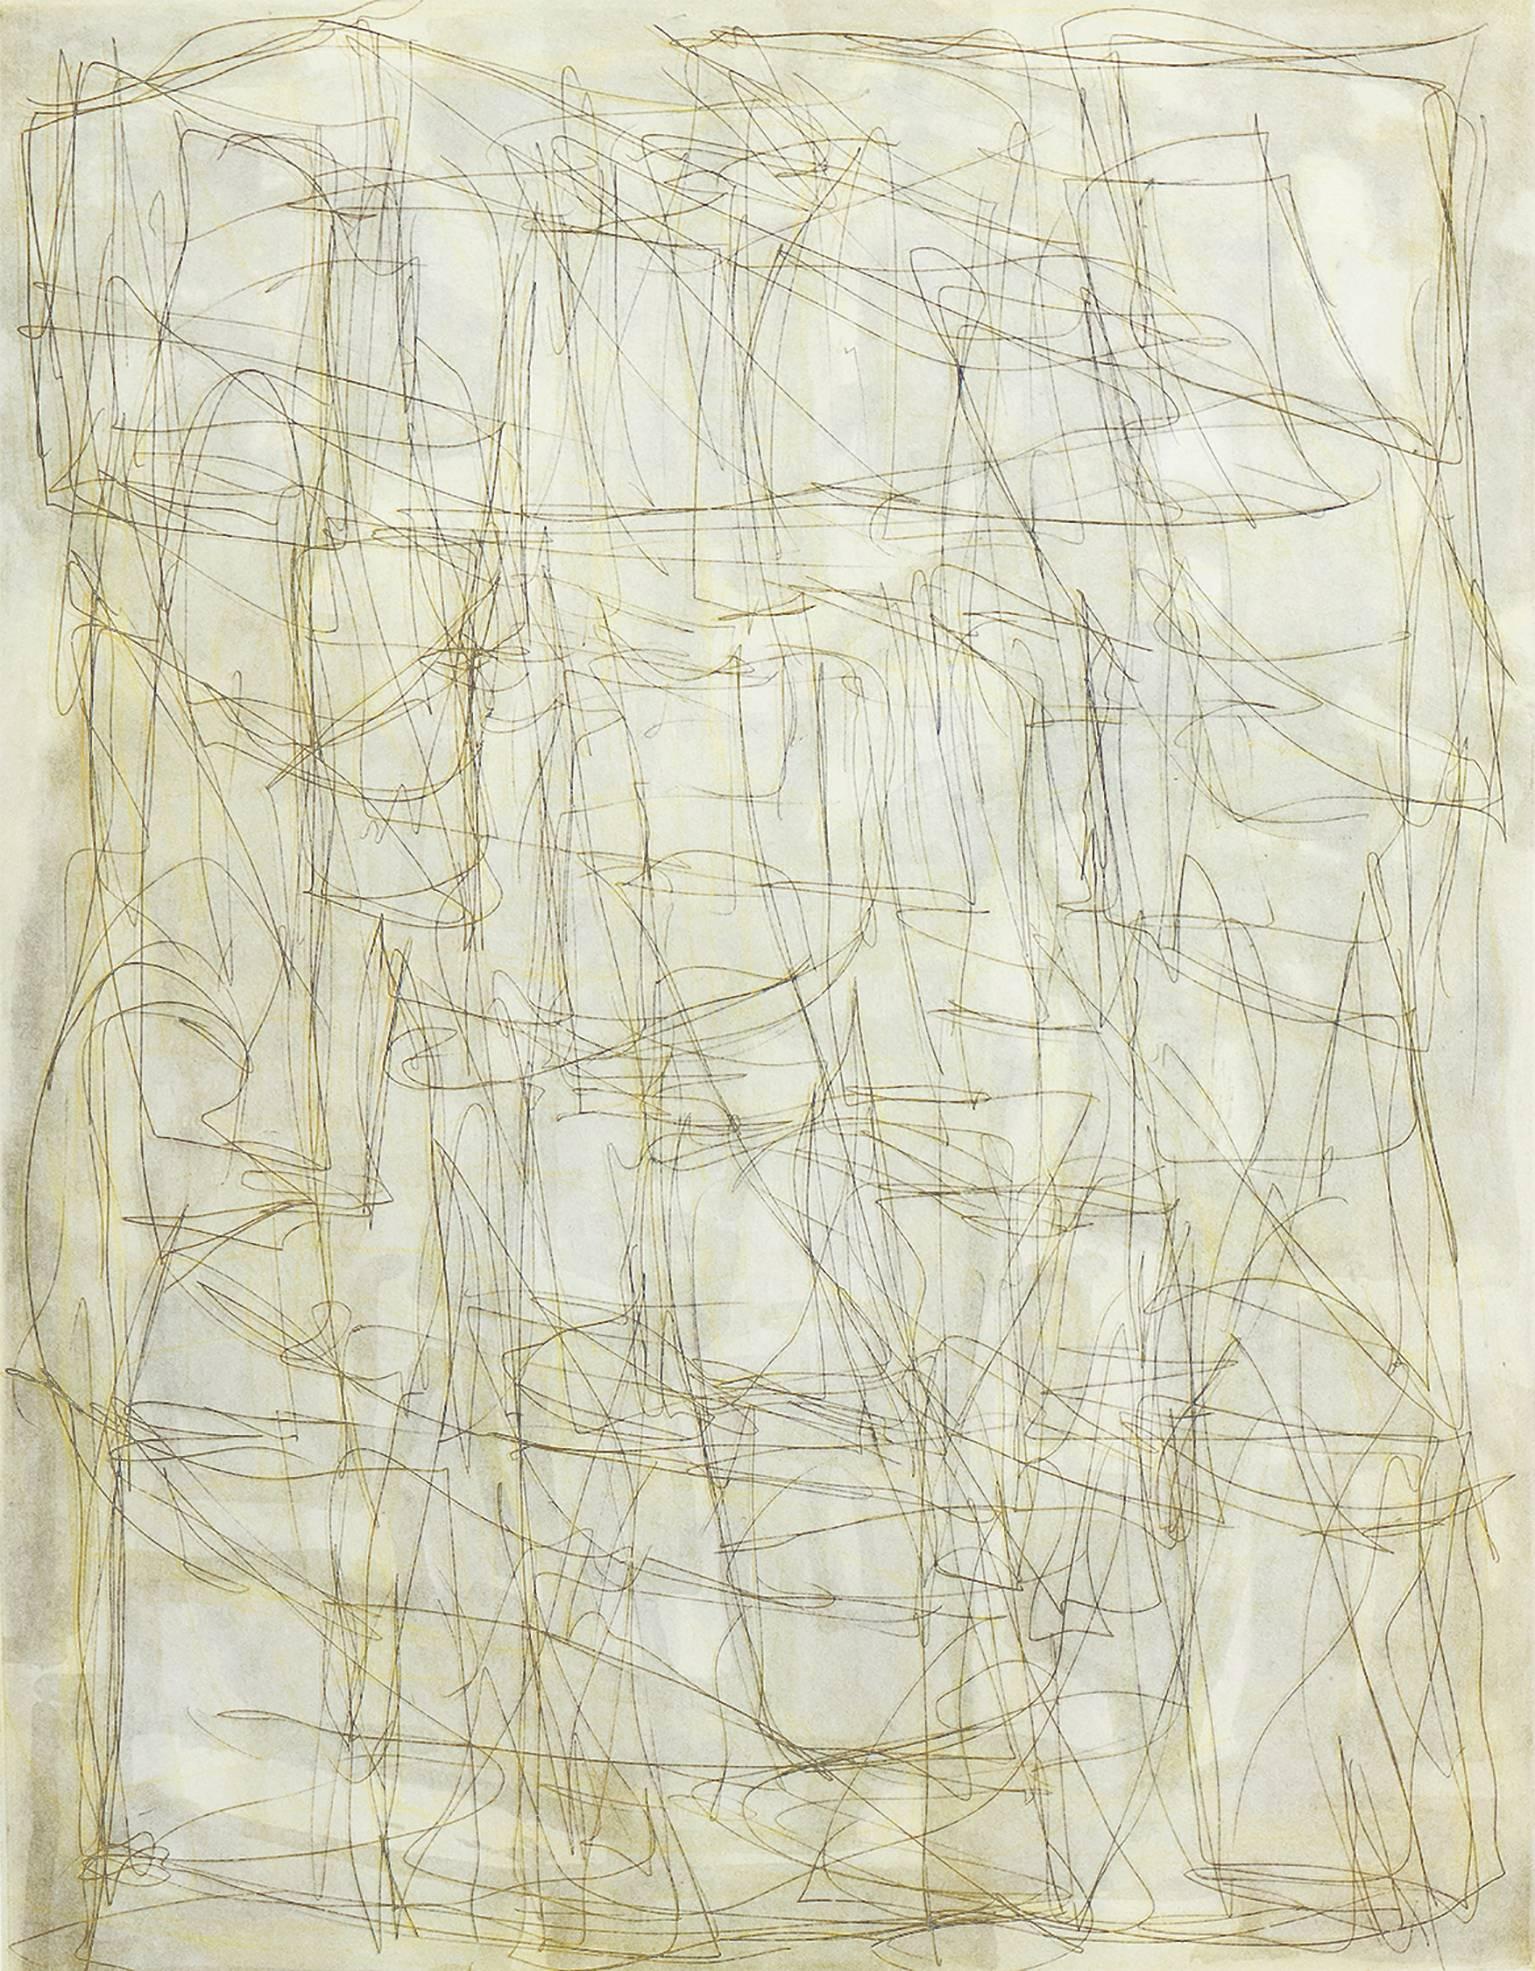 Claire Seidl Abstract Print - White Lies, abstract linear etching, aquatint, monoprint, silver, gray, yellow.